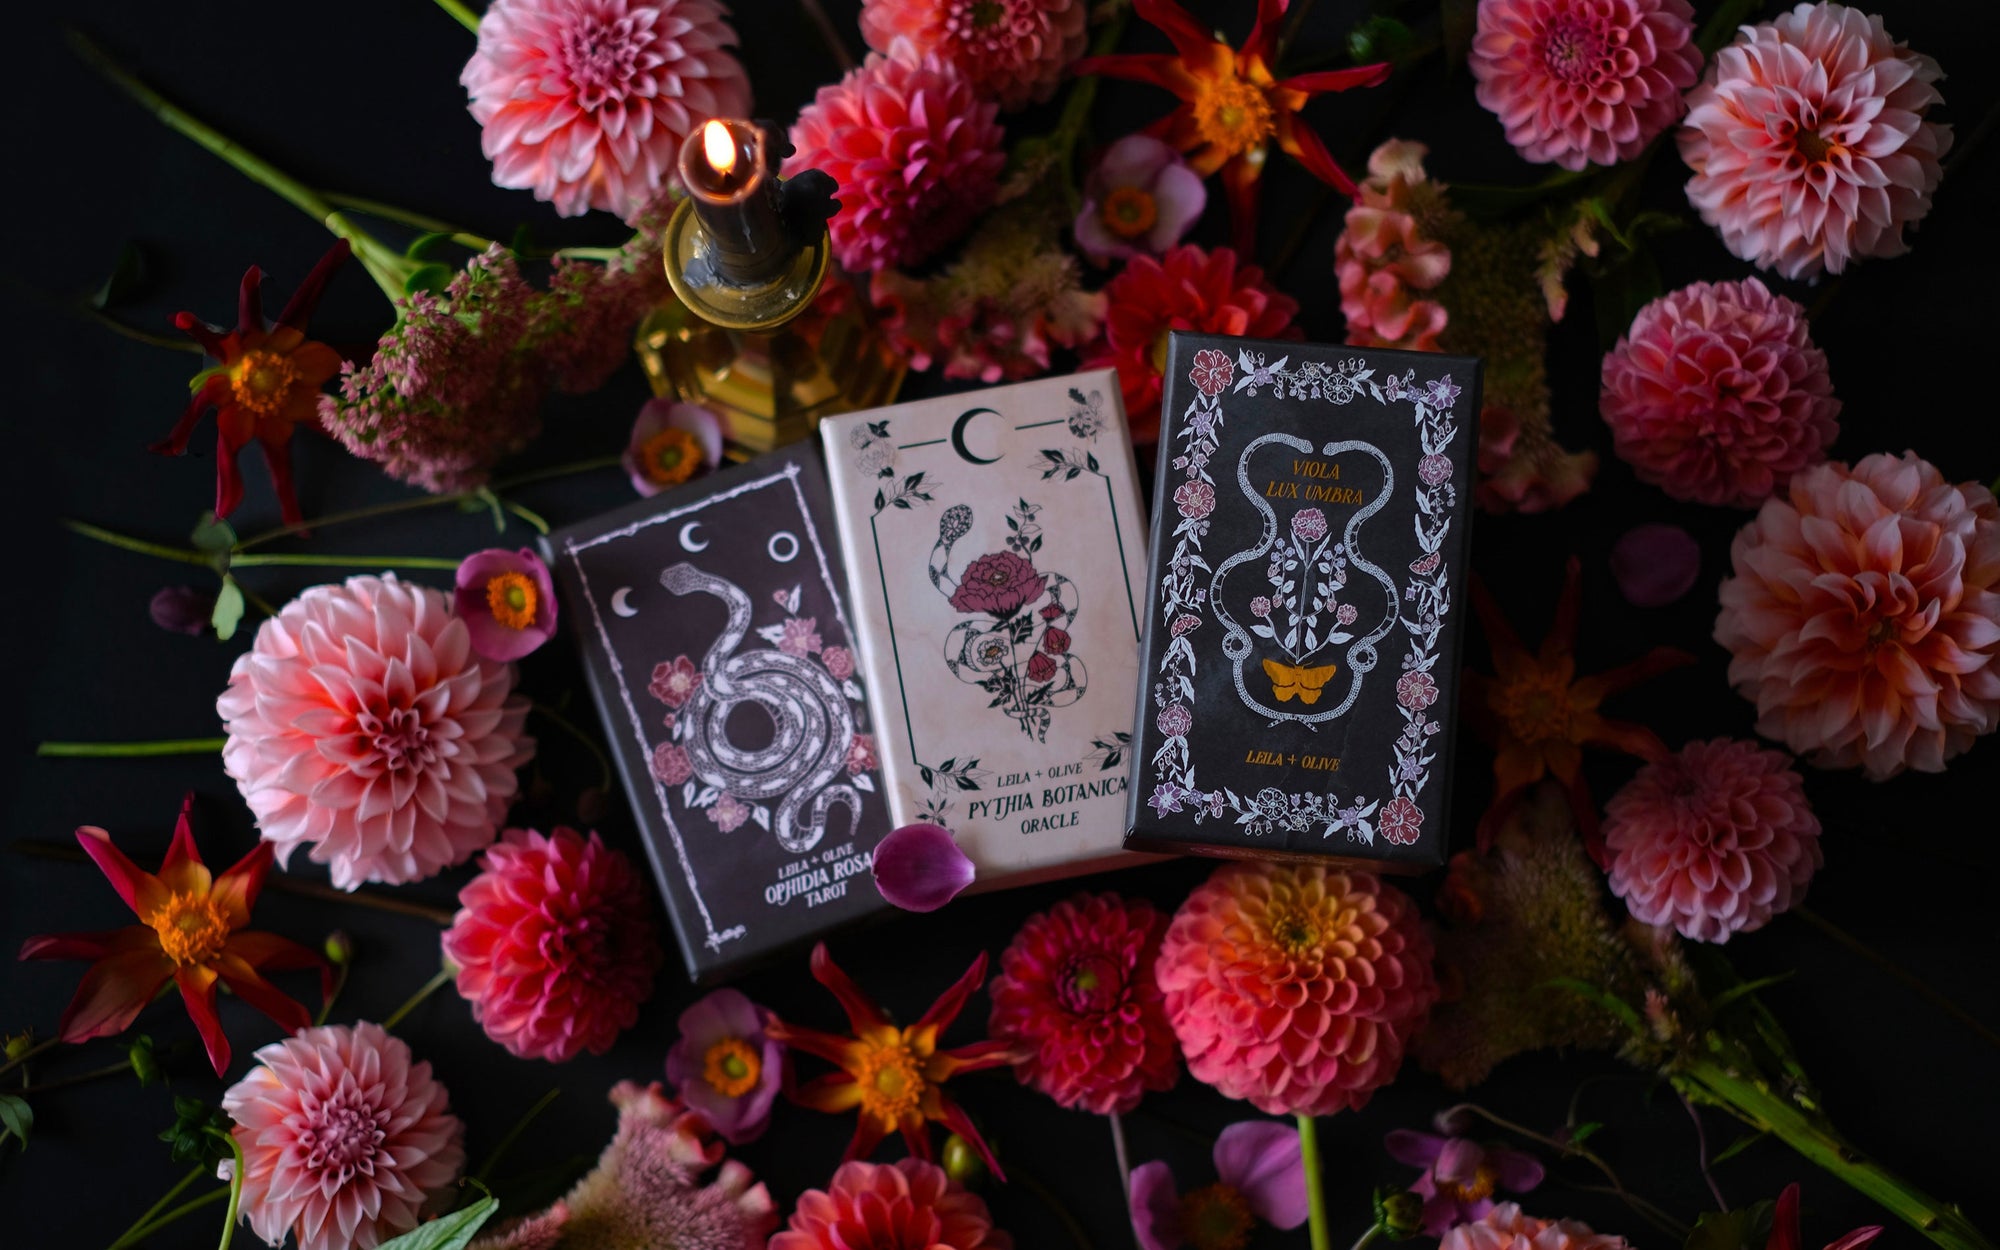 Botanical Tarot and Botanical Oracle card decks, illustrated and painted by hand. Each of these botanical and flora inspired, intuitive tarot decks delves into the garden and the natural world while remaining rooted in mythology and tradition.